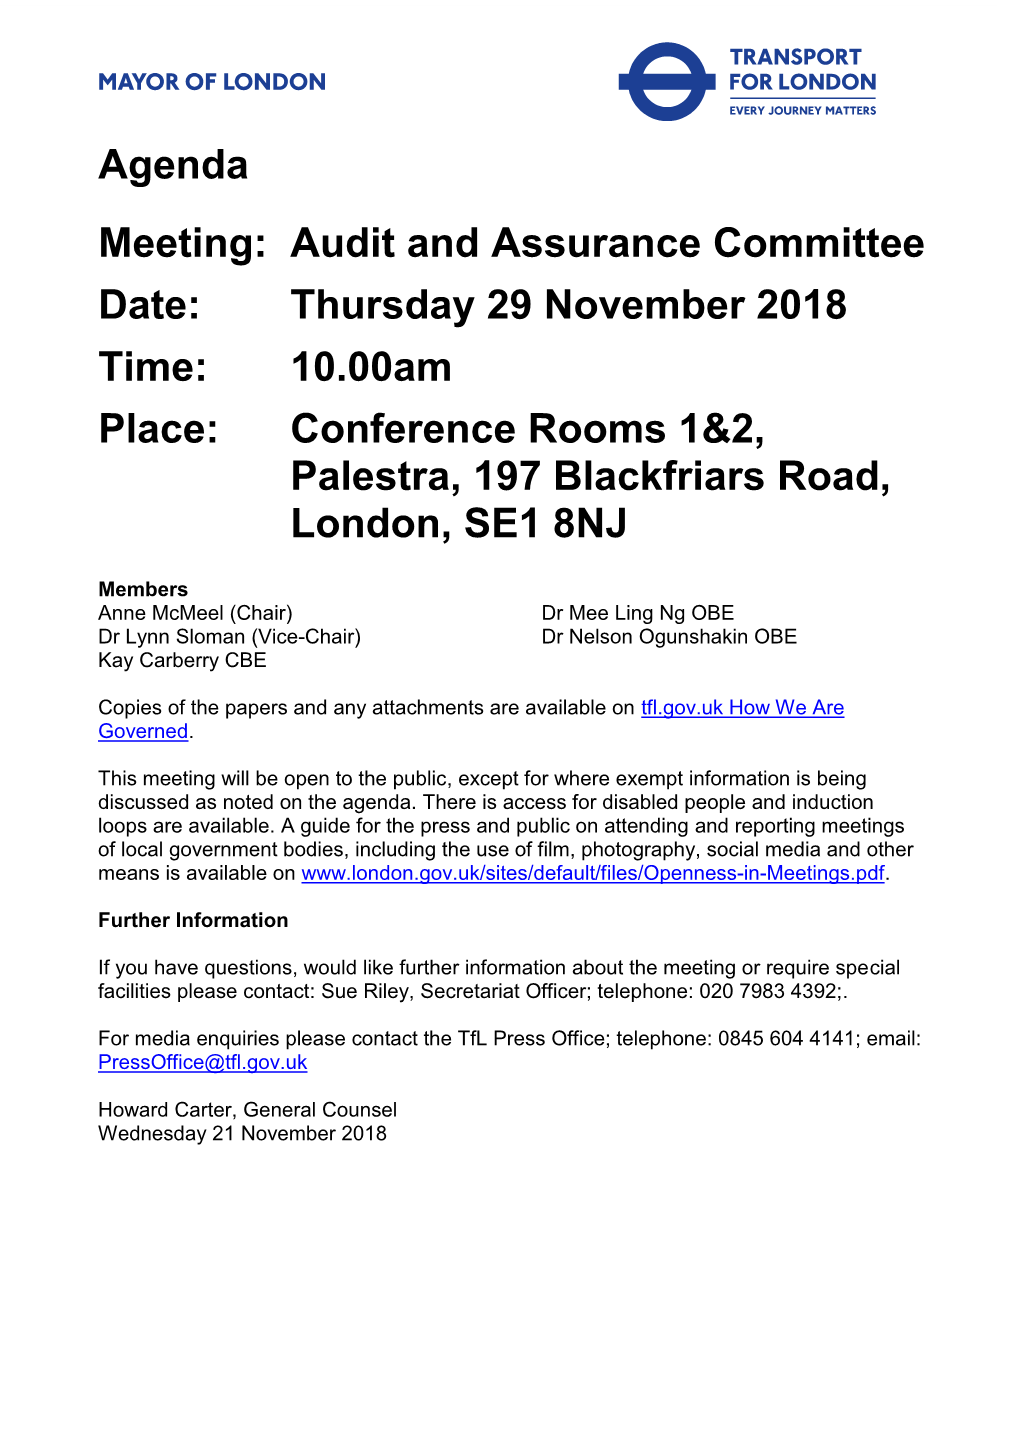 (Public Pack)Agenda Document for Audit and Assurance Committee, 29